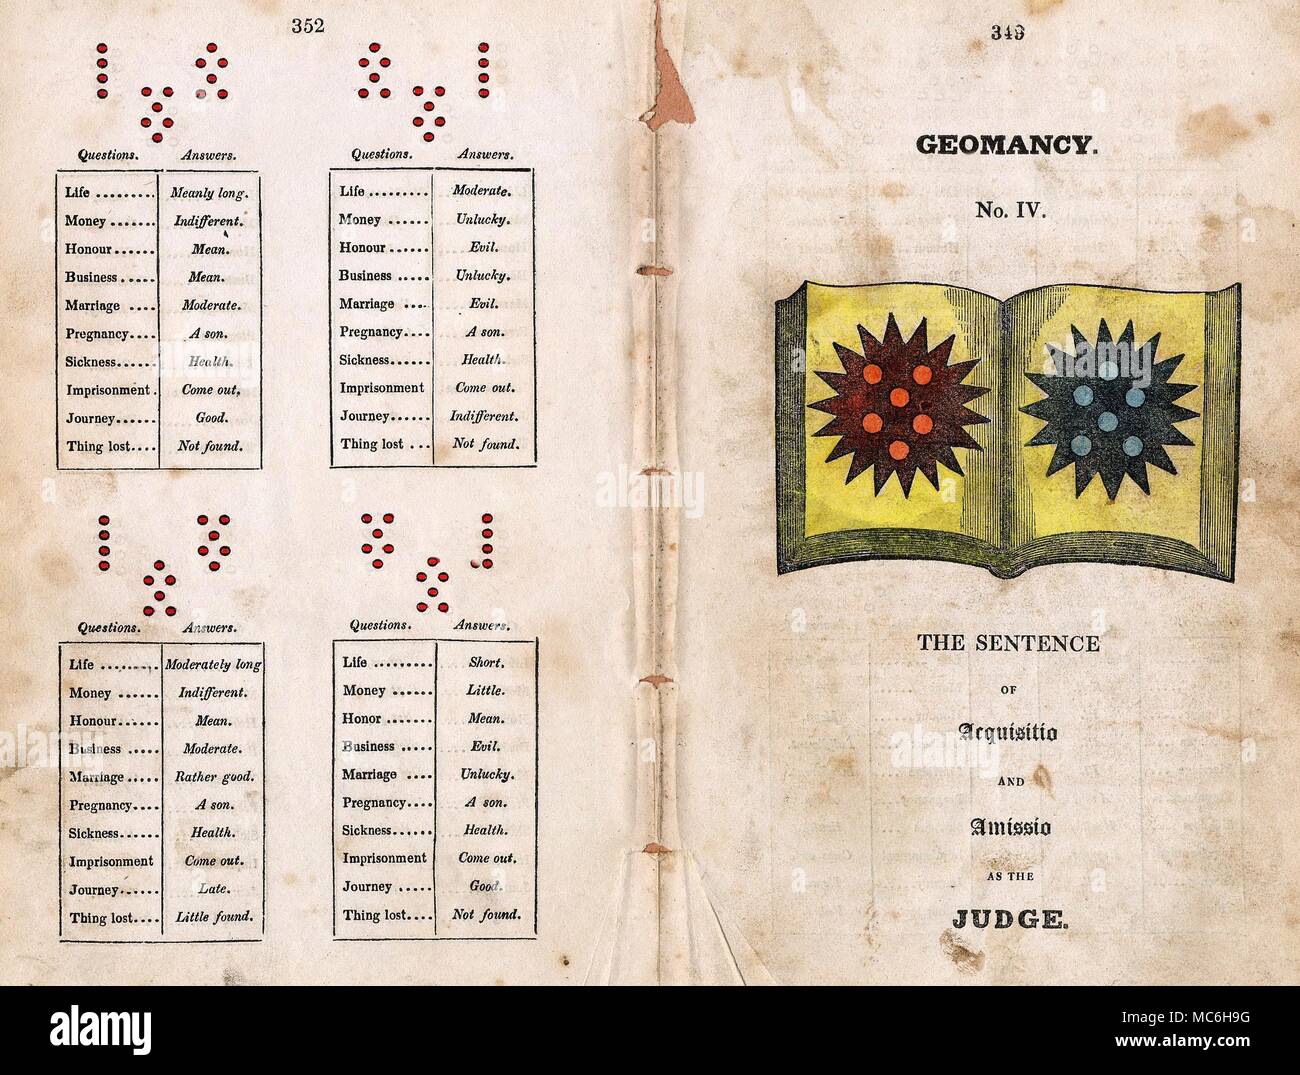 GEOMANCY Page dealing with geomancy, from the Victorian Book of Fate. The left hand page gives some sample geomantic formal patterns, with corresponding answers. On the right, are the two figures for Acquisitio [Gain] and Amissio [Loss]. Stock Photo